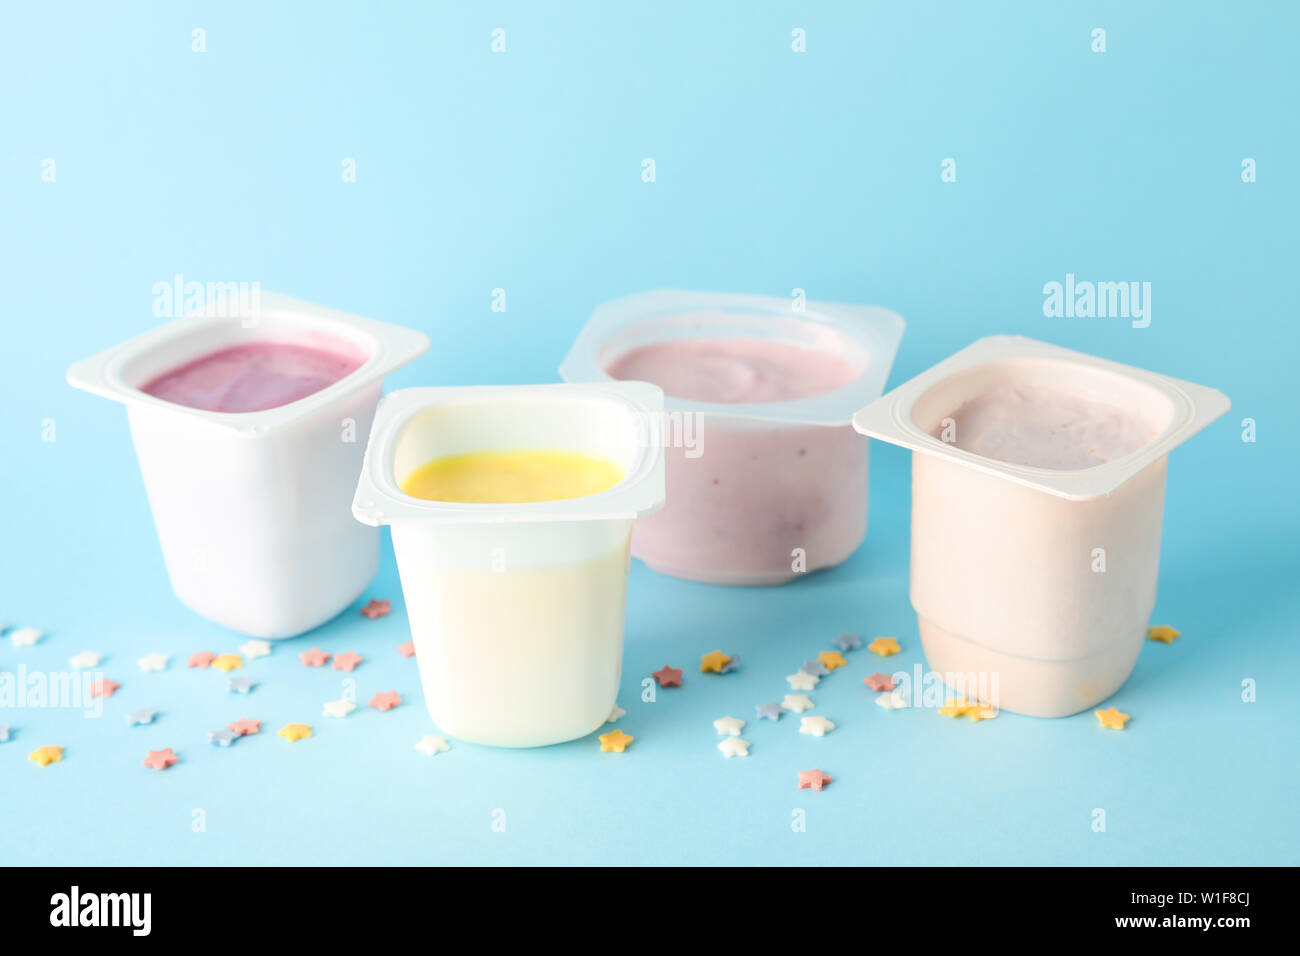 Download Plastic Cups With Yogurt And Small Stars On Color Background Space For Text Stock Photo Alamy Yellowimages Mockups